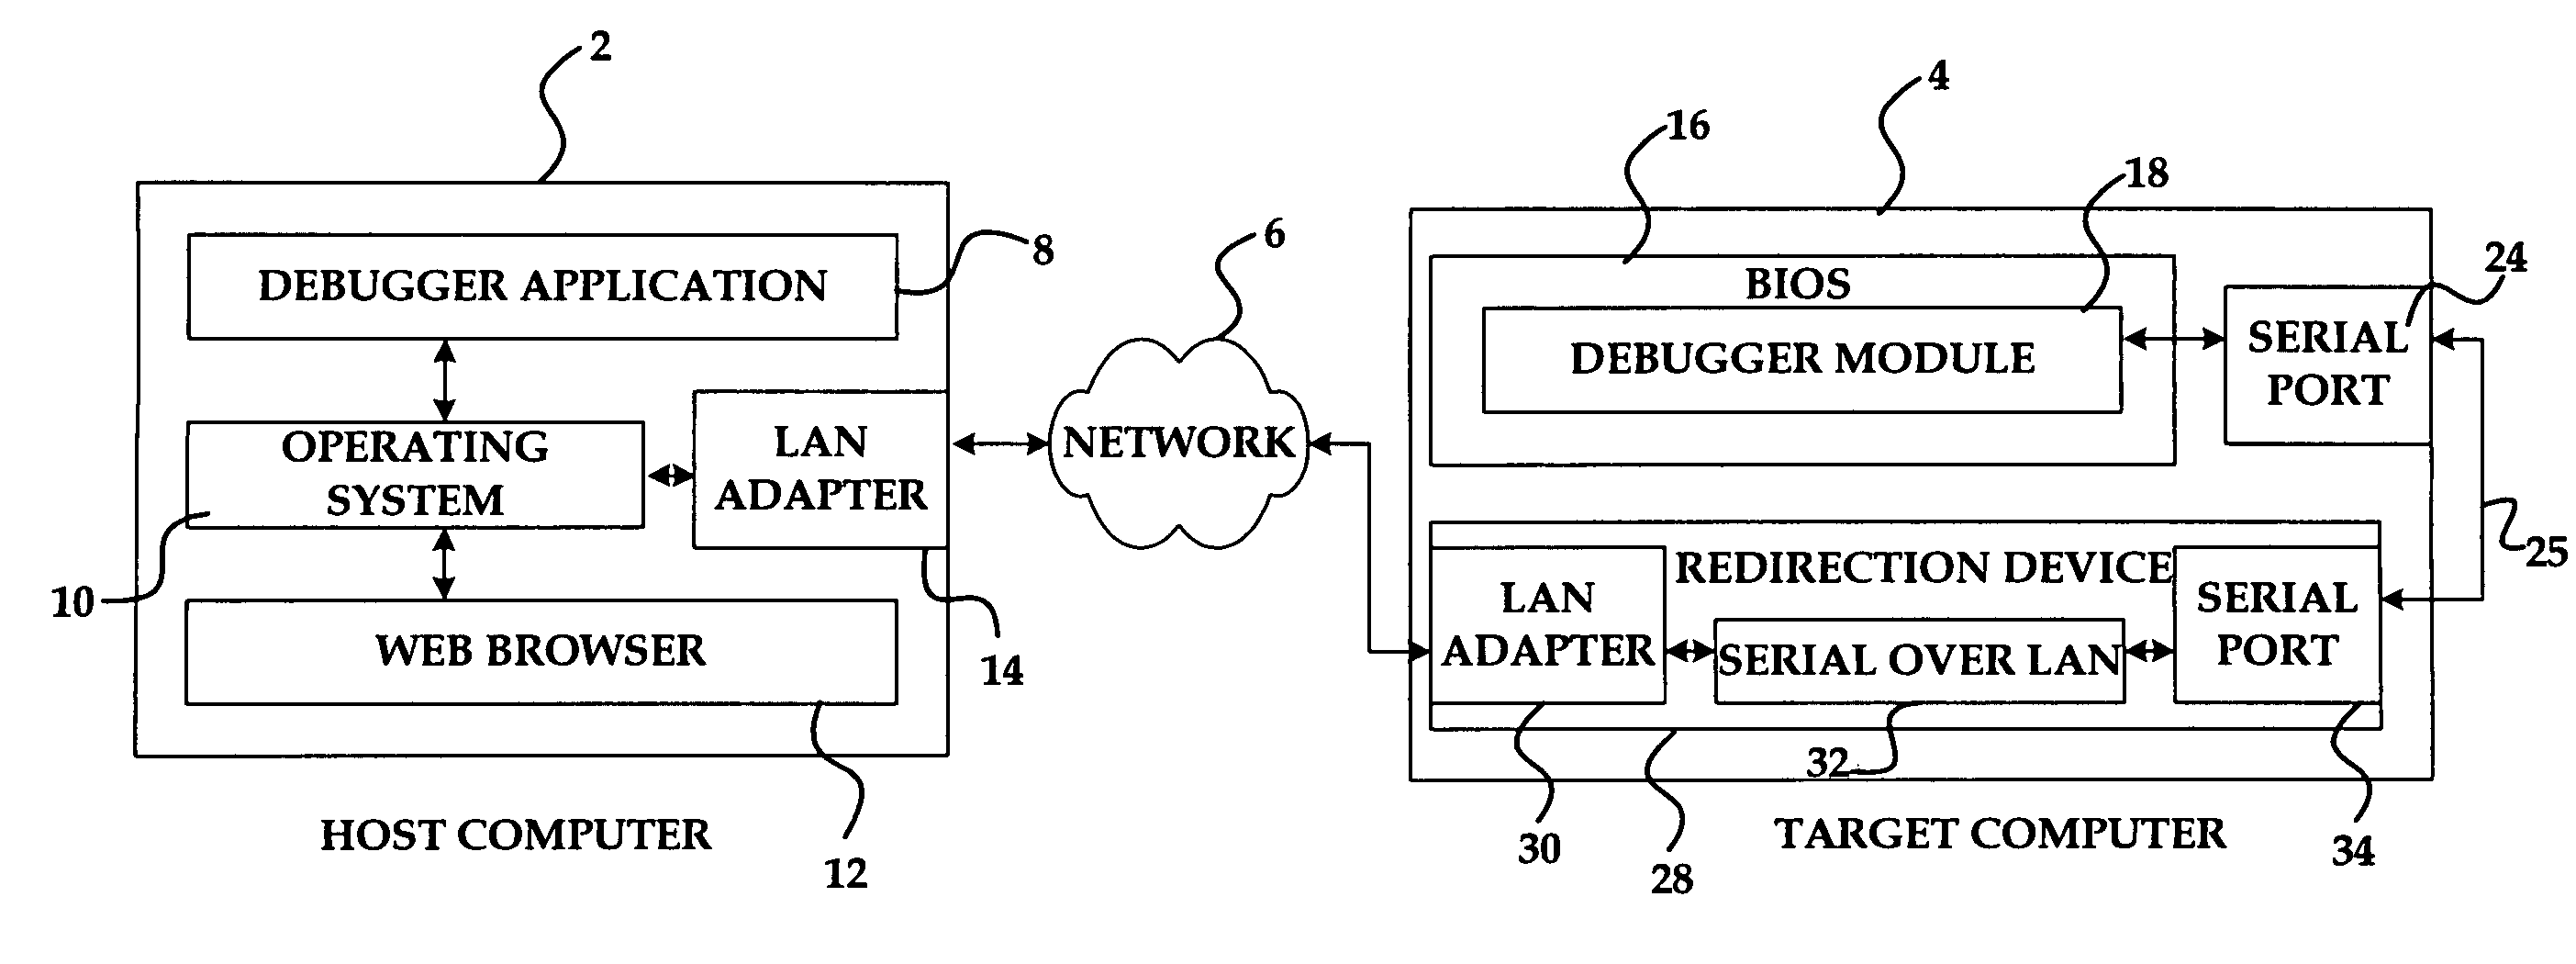 Method and system for remote software debugging